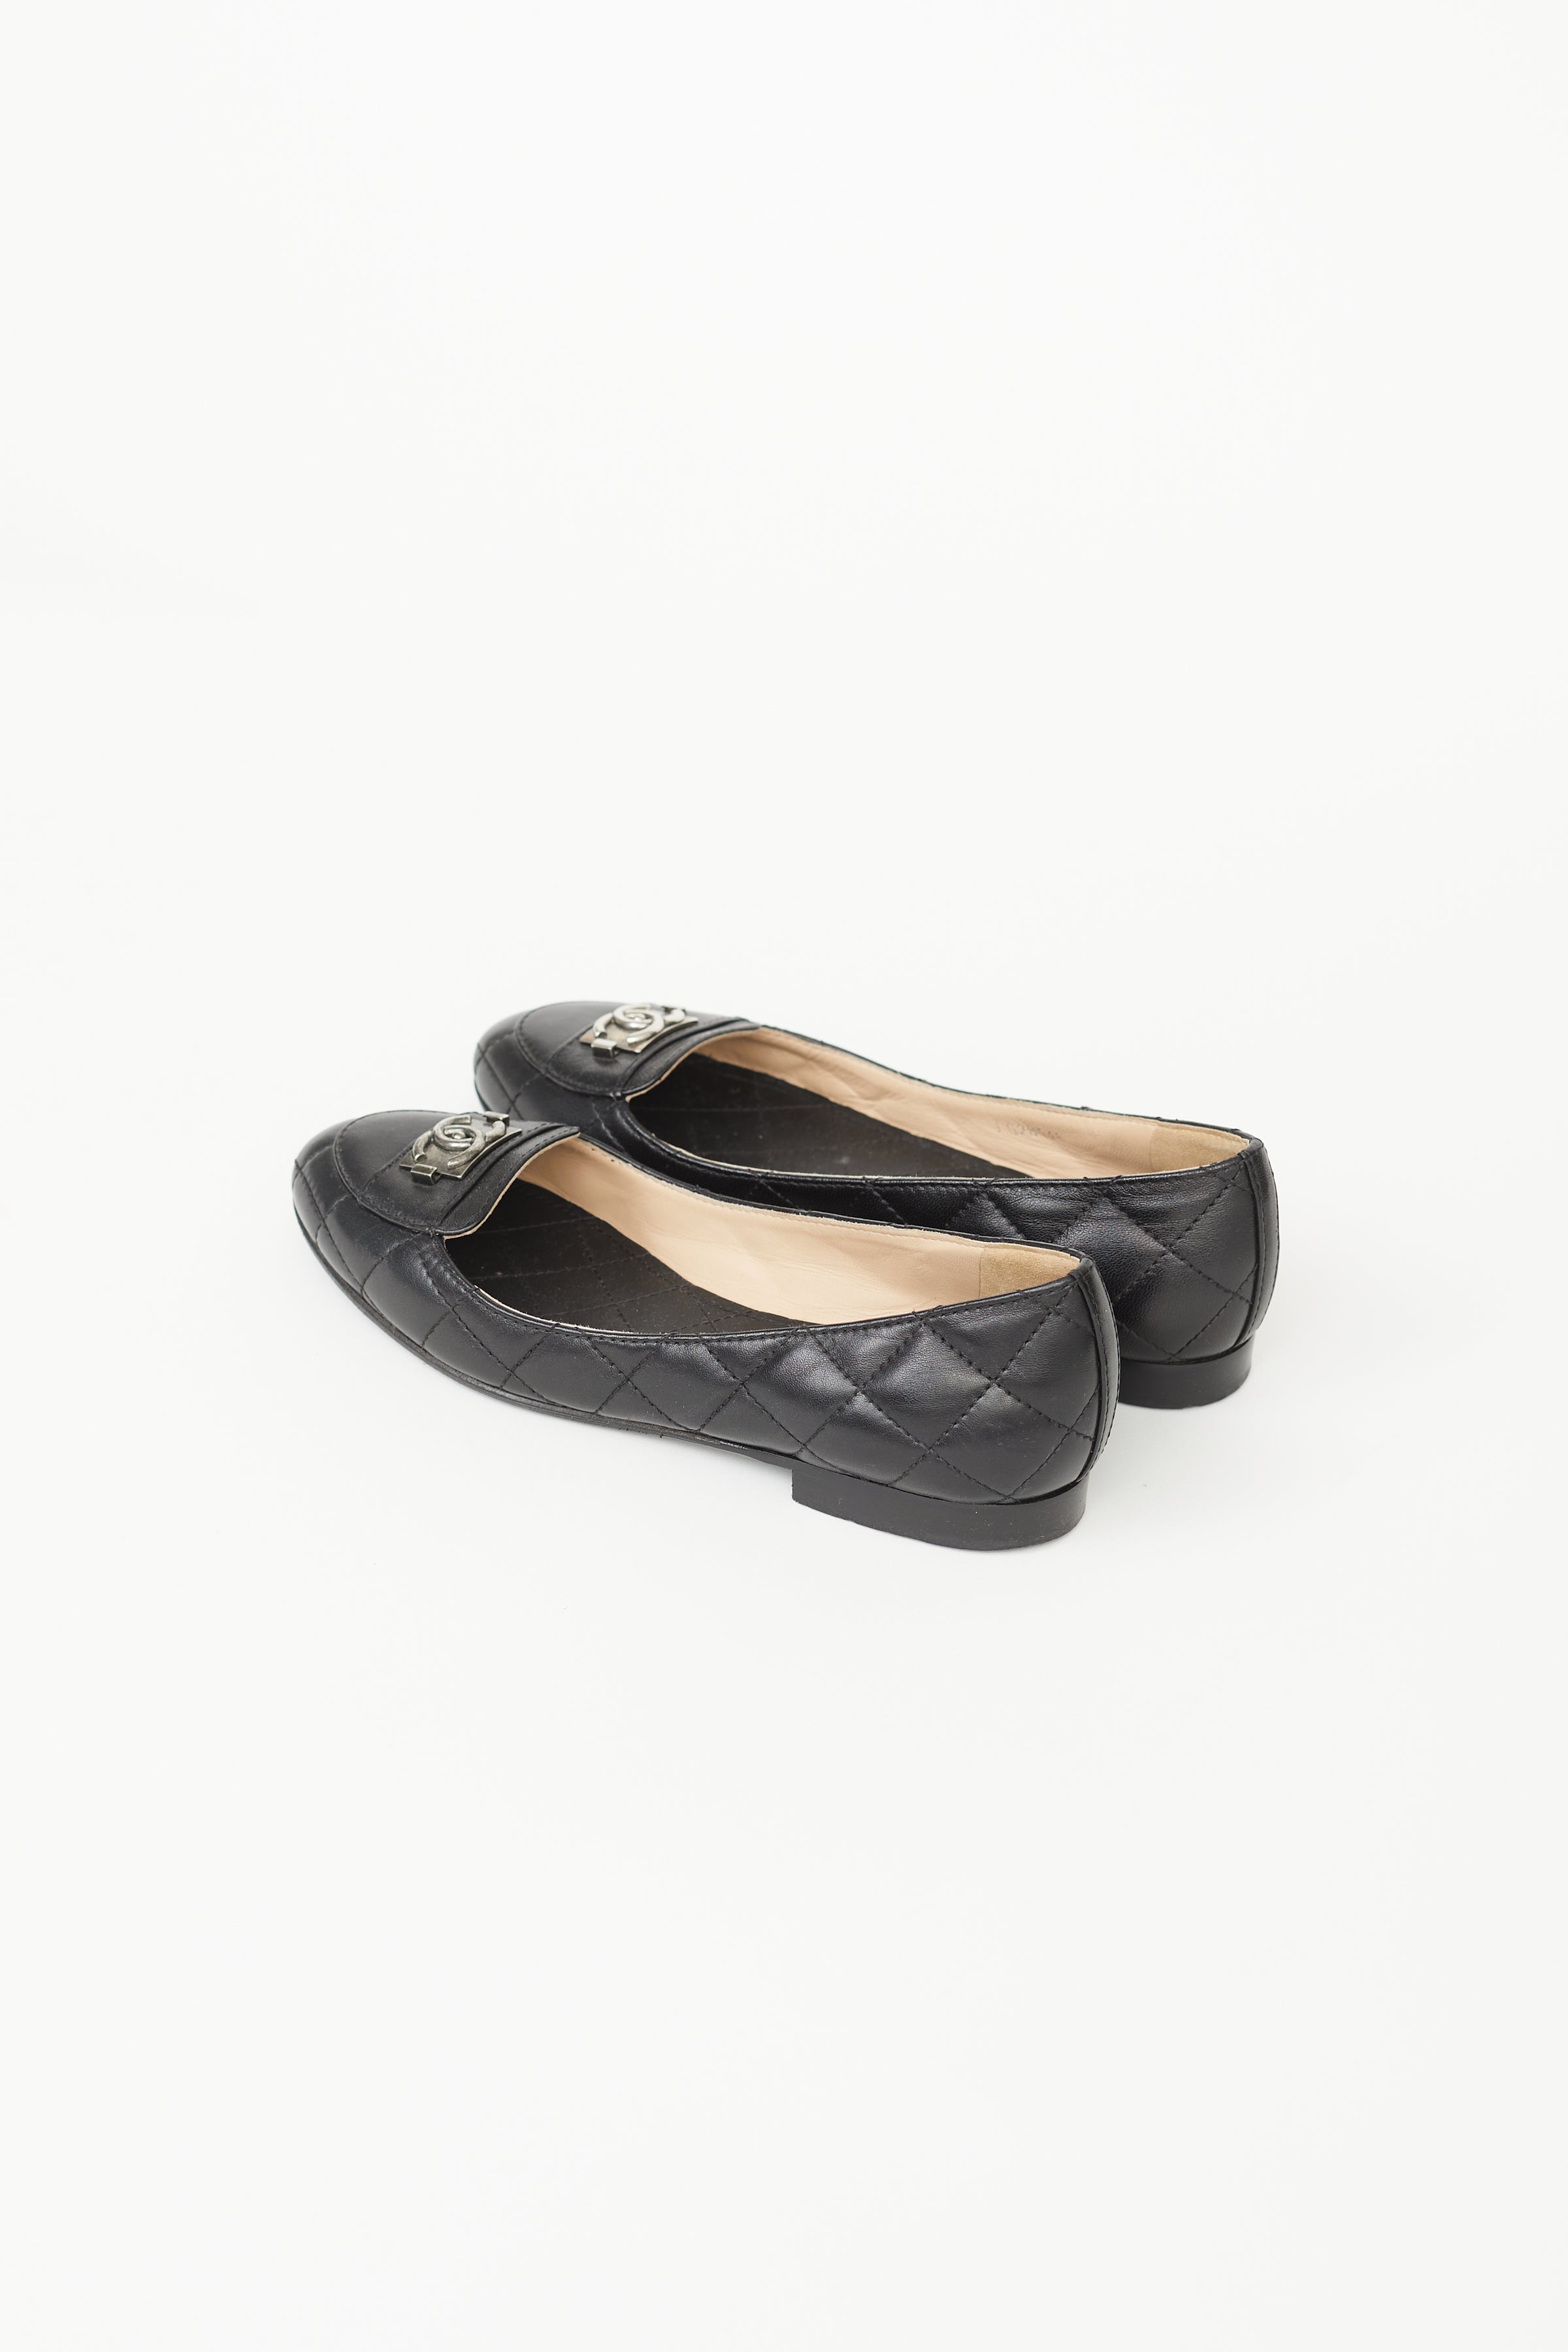 Chanel // 2000 Black Leather Quilted Ballet Flat – VSP Consignment